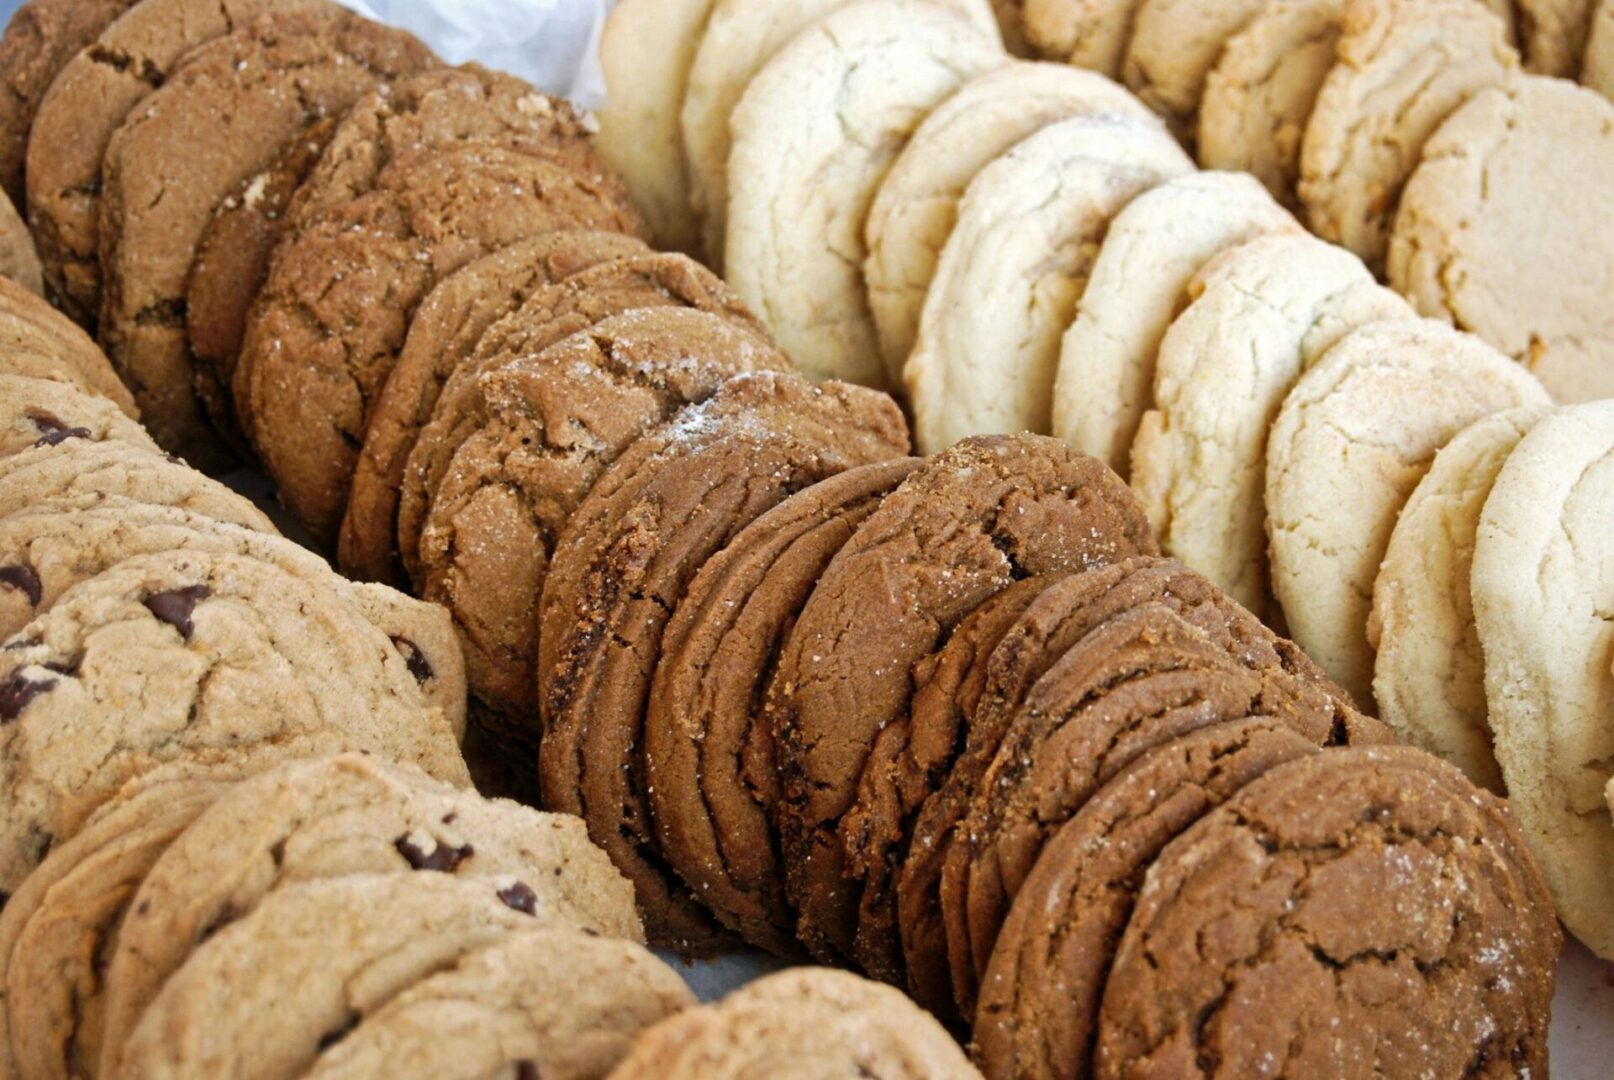 A close up of several different cookies on display.